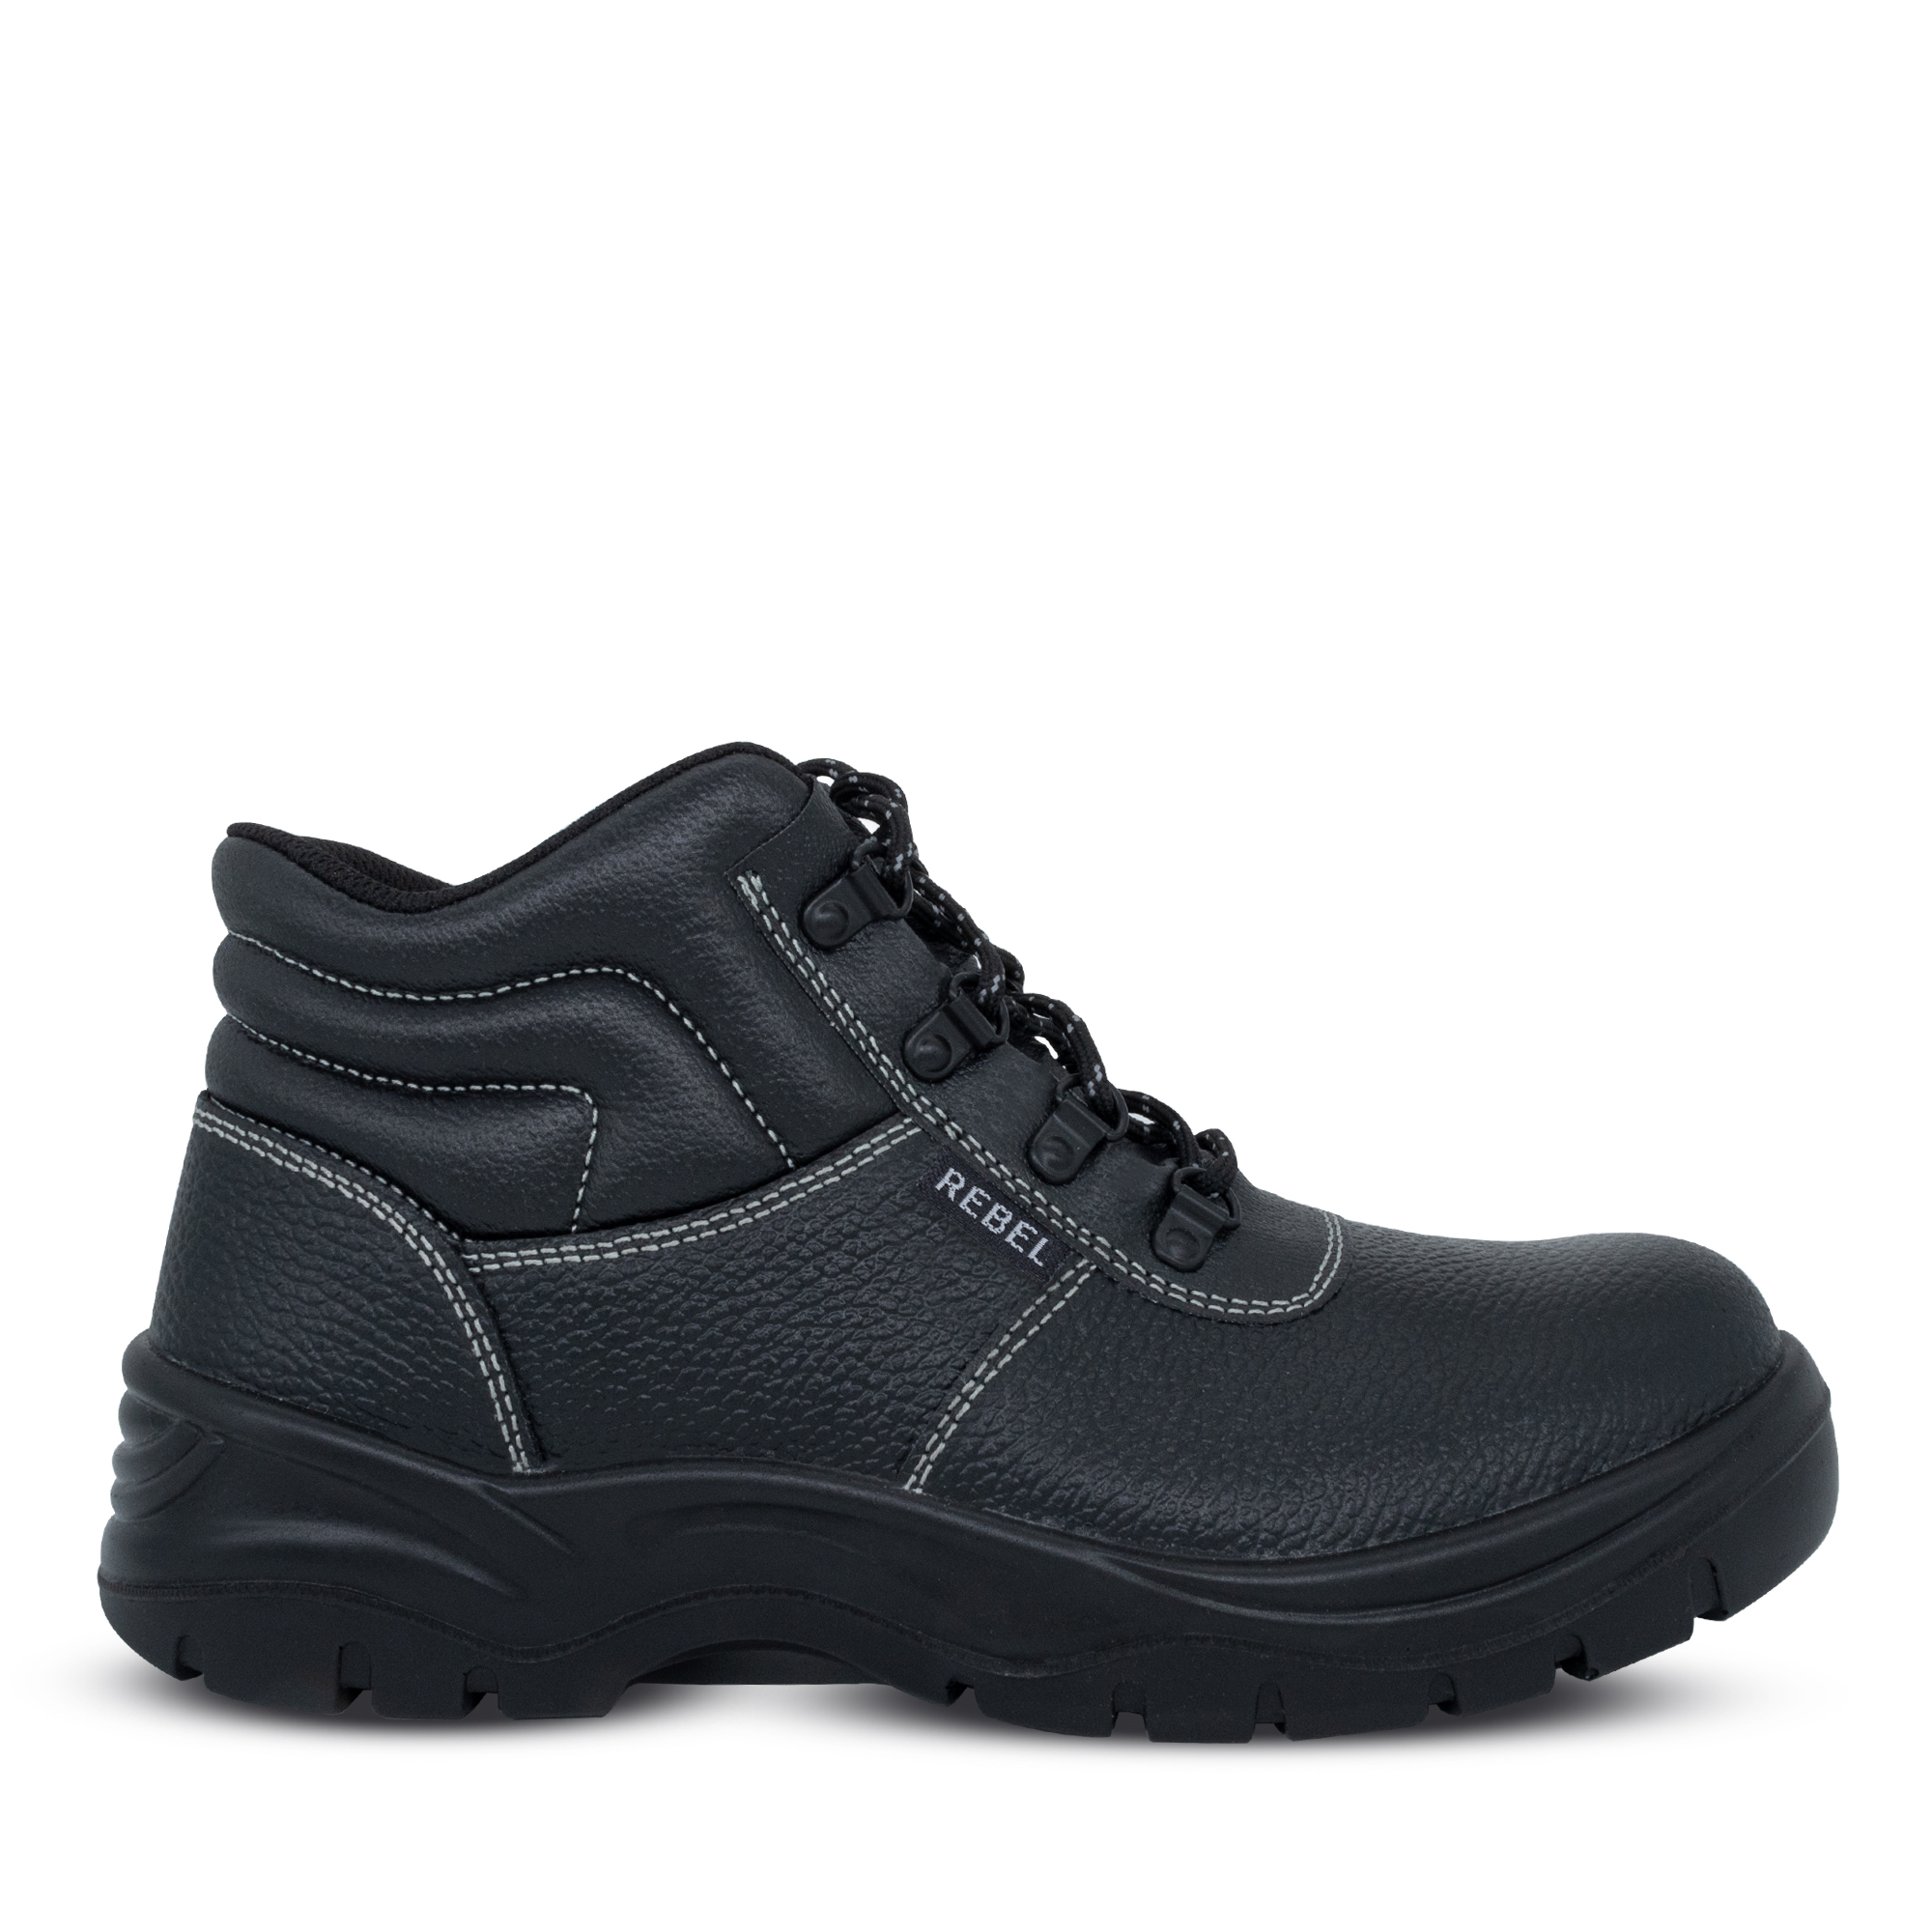 rebel safety shoes price